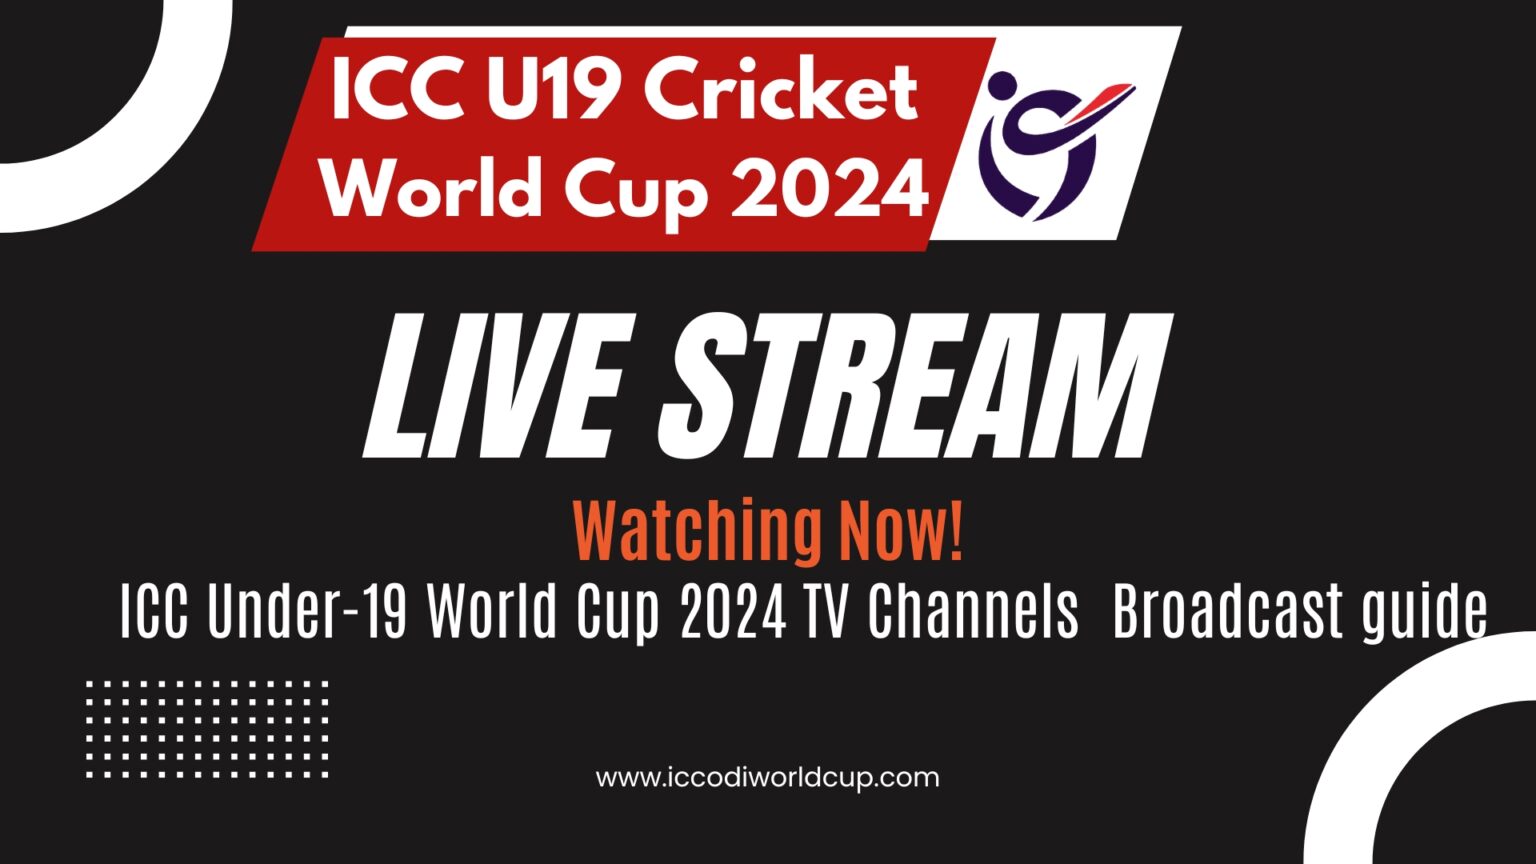 ICC Under19 World Cup 2024, Where To Watch Live broadcast guide ICC